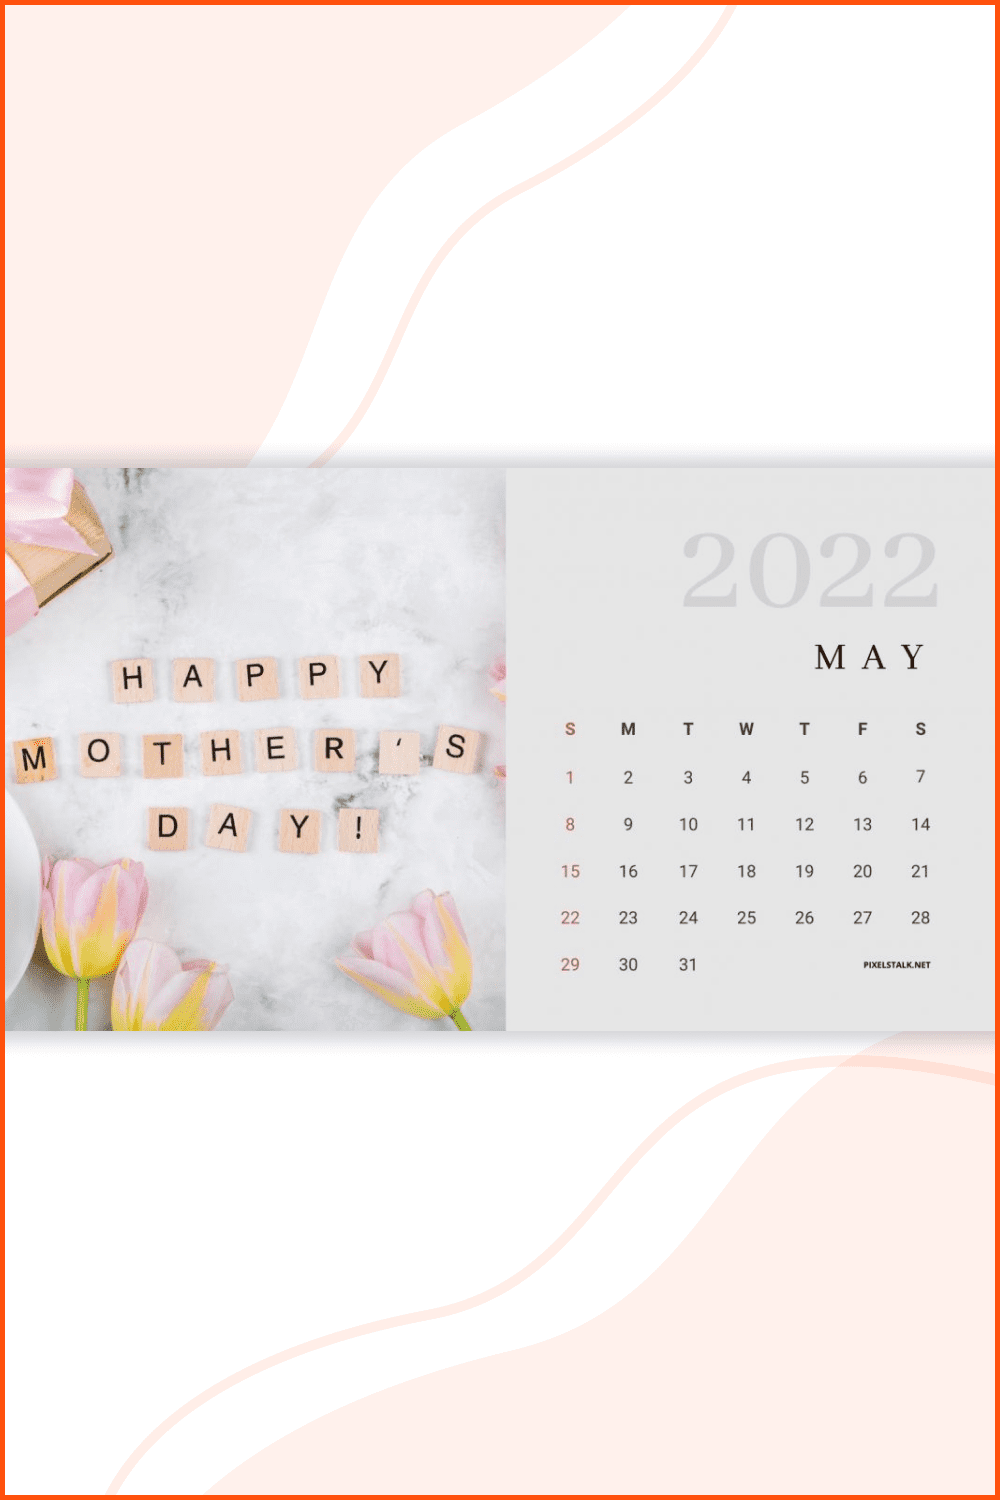 Happy Mother’s Day Calendar May 2022.